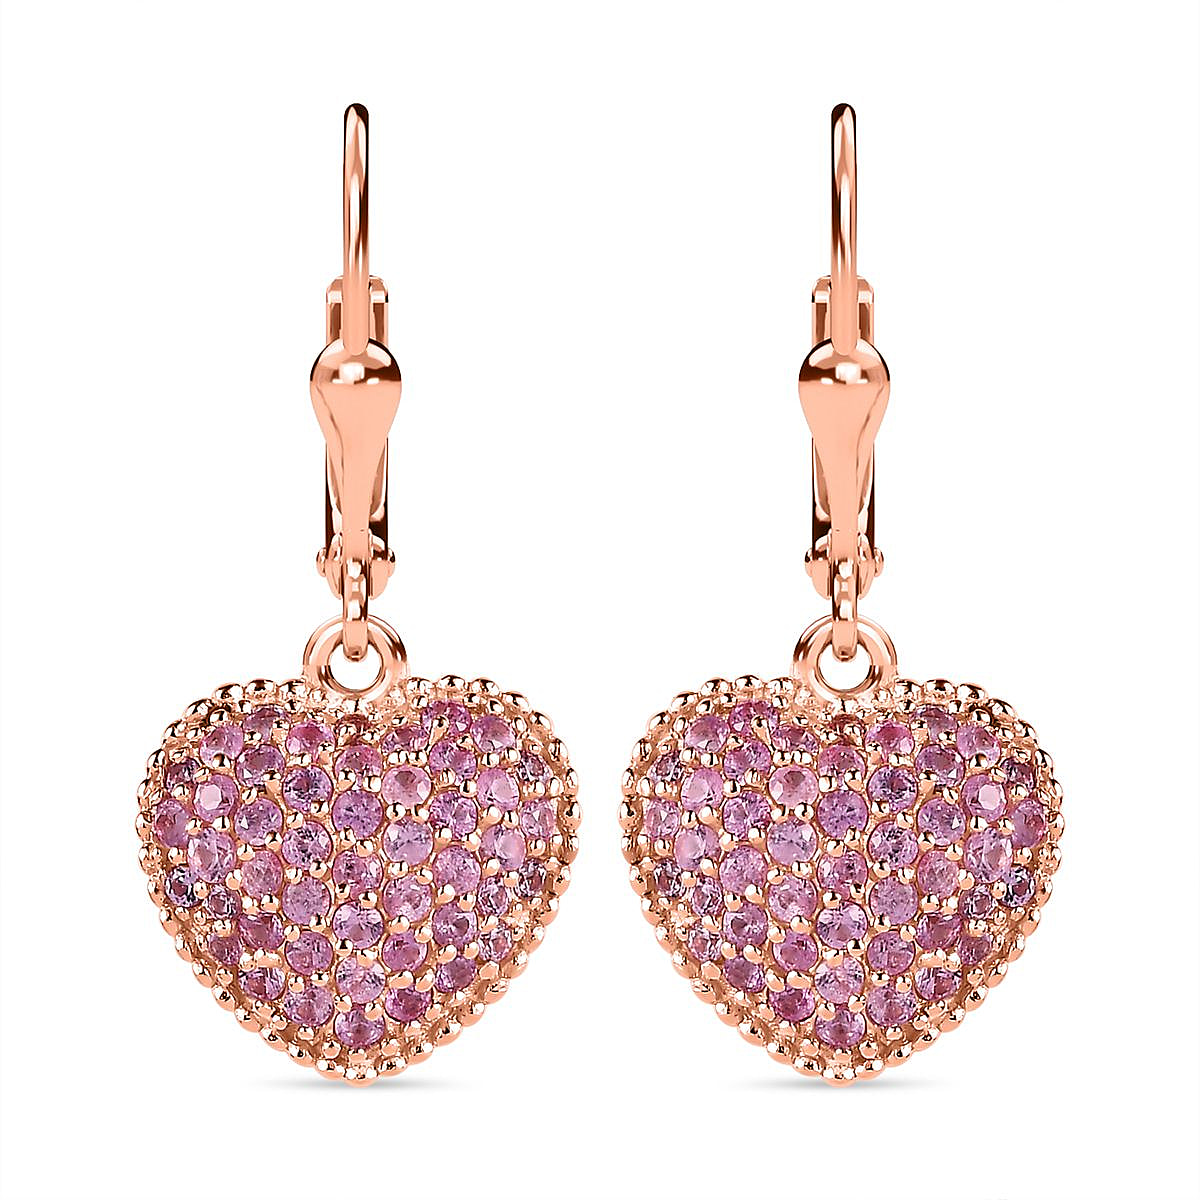 Pink Sapphire Heart Earrings in 18K Rose Gold Vermeil Plated Sterling Silver 1.42 Ct